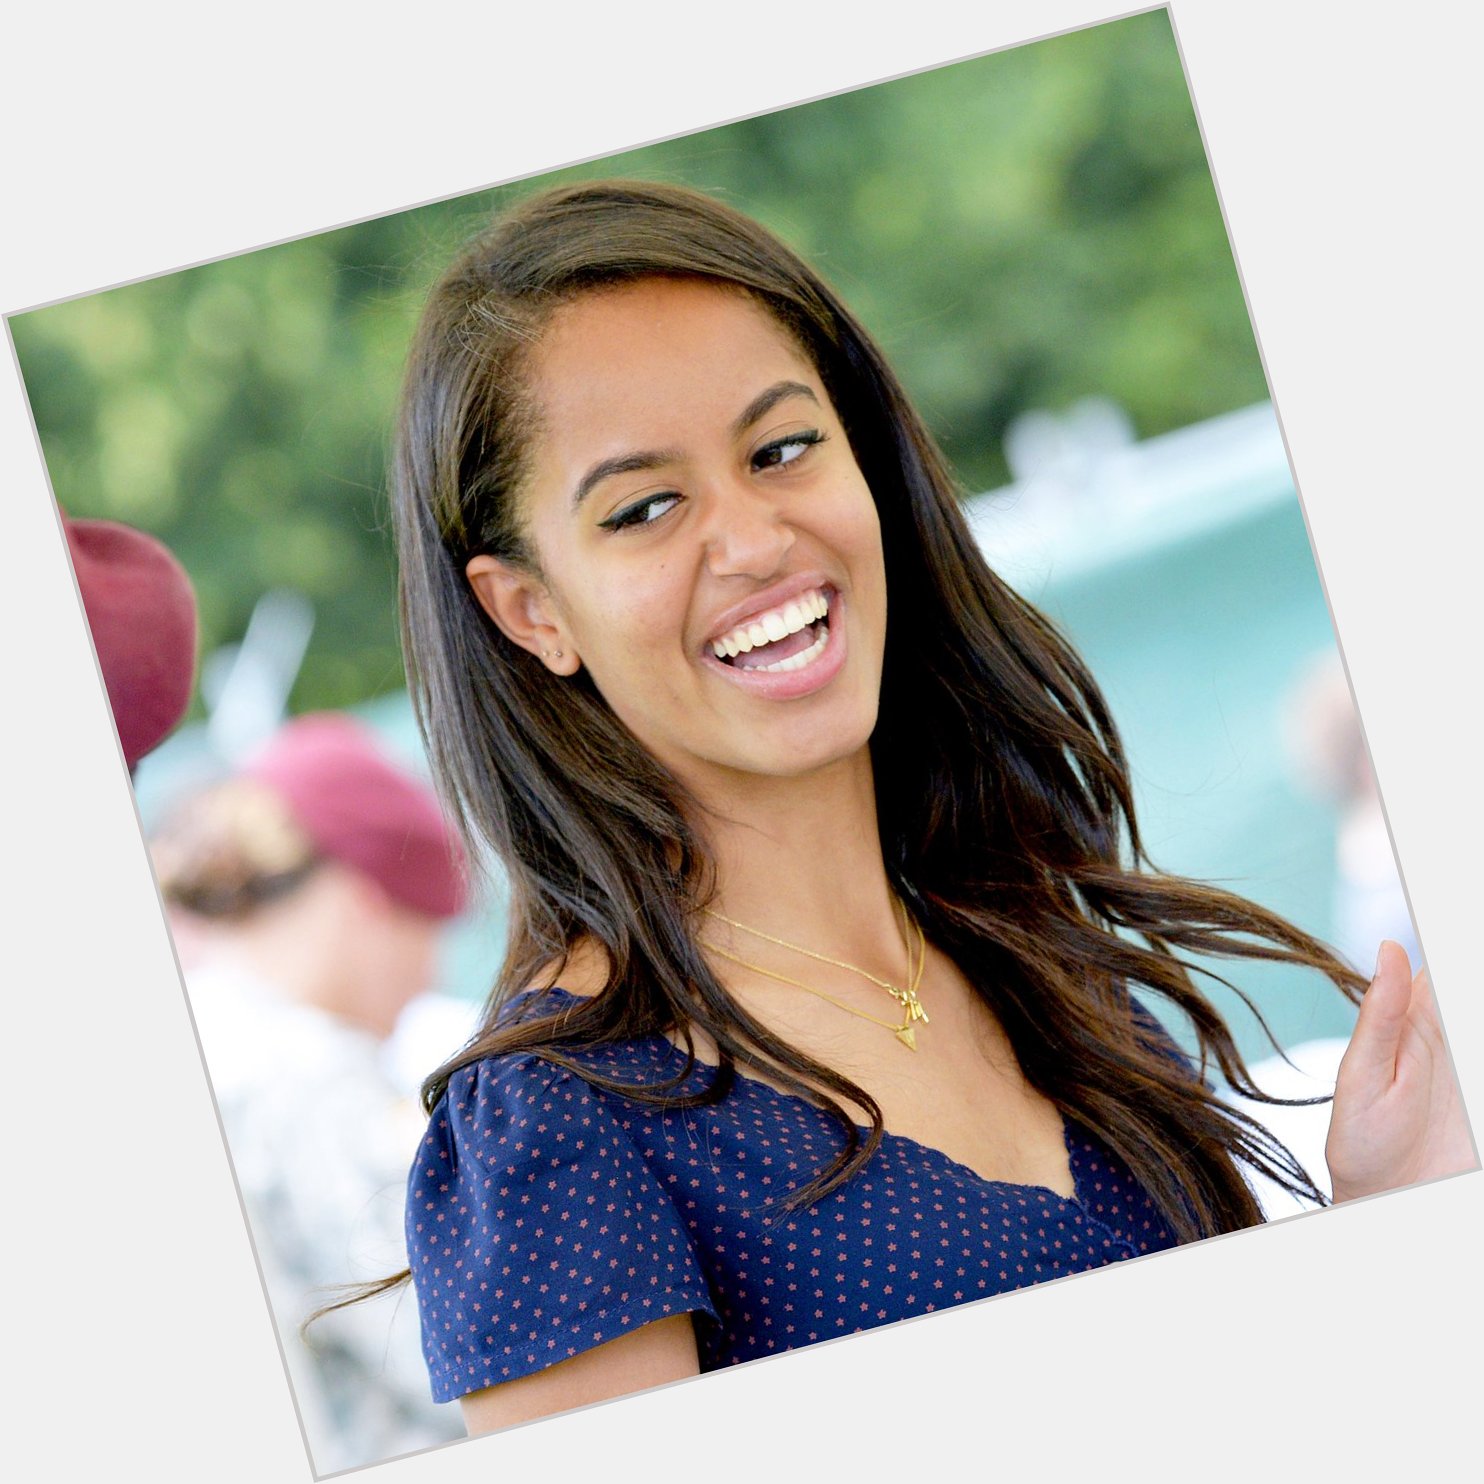 IT\S A B\DAY CELEBRATION!!!!  Happy 21st Birthday to Former First Daughter Malia Obama!  